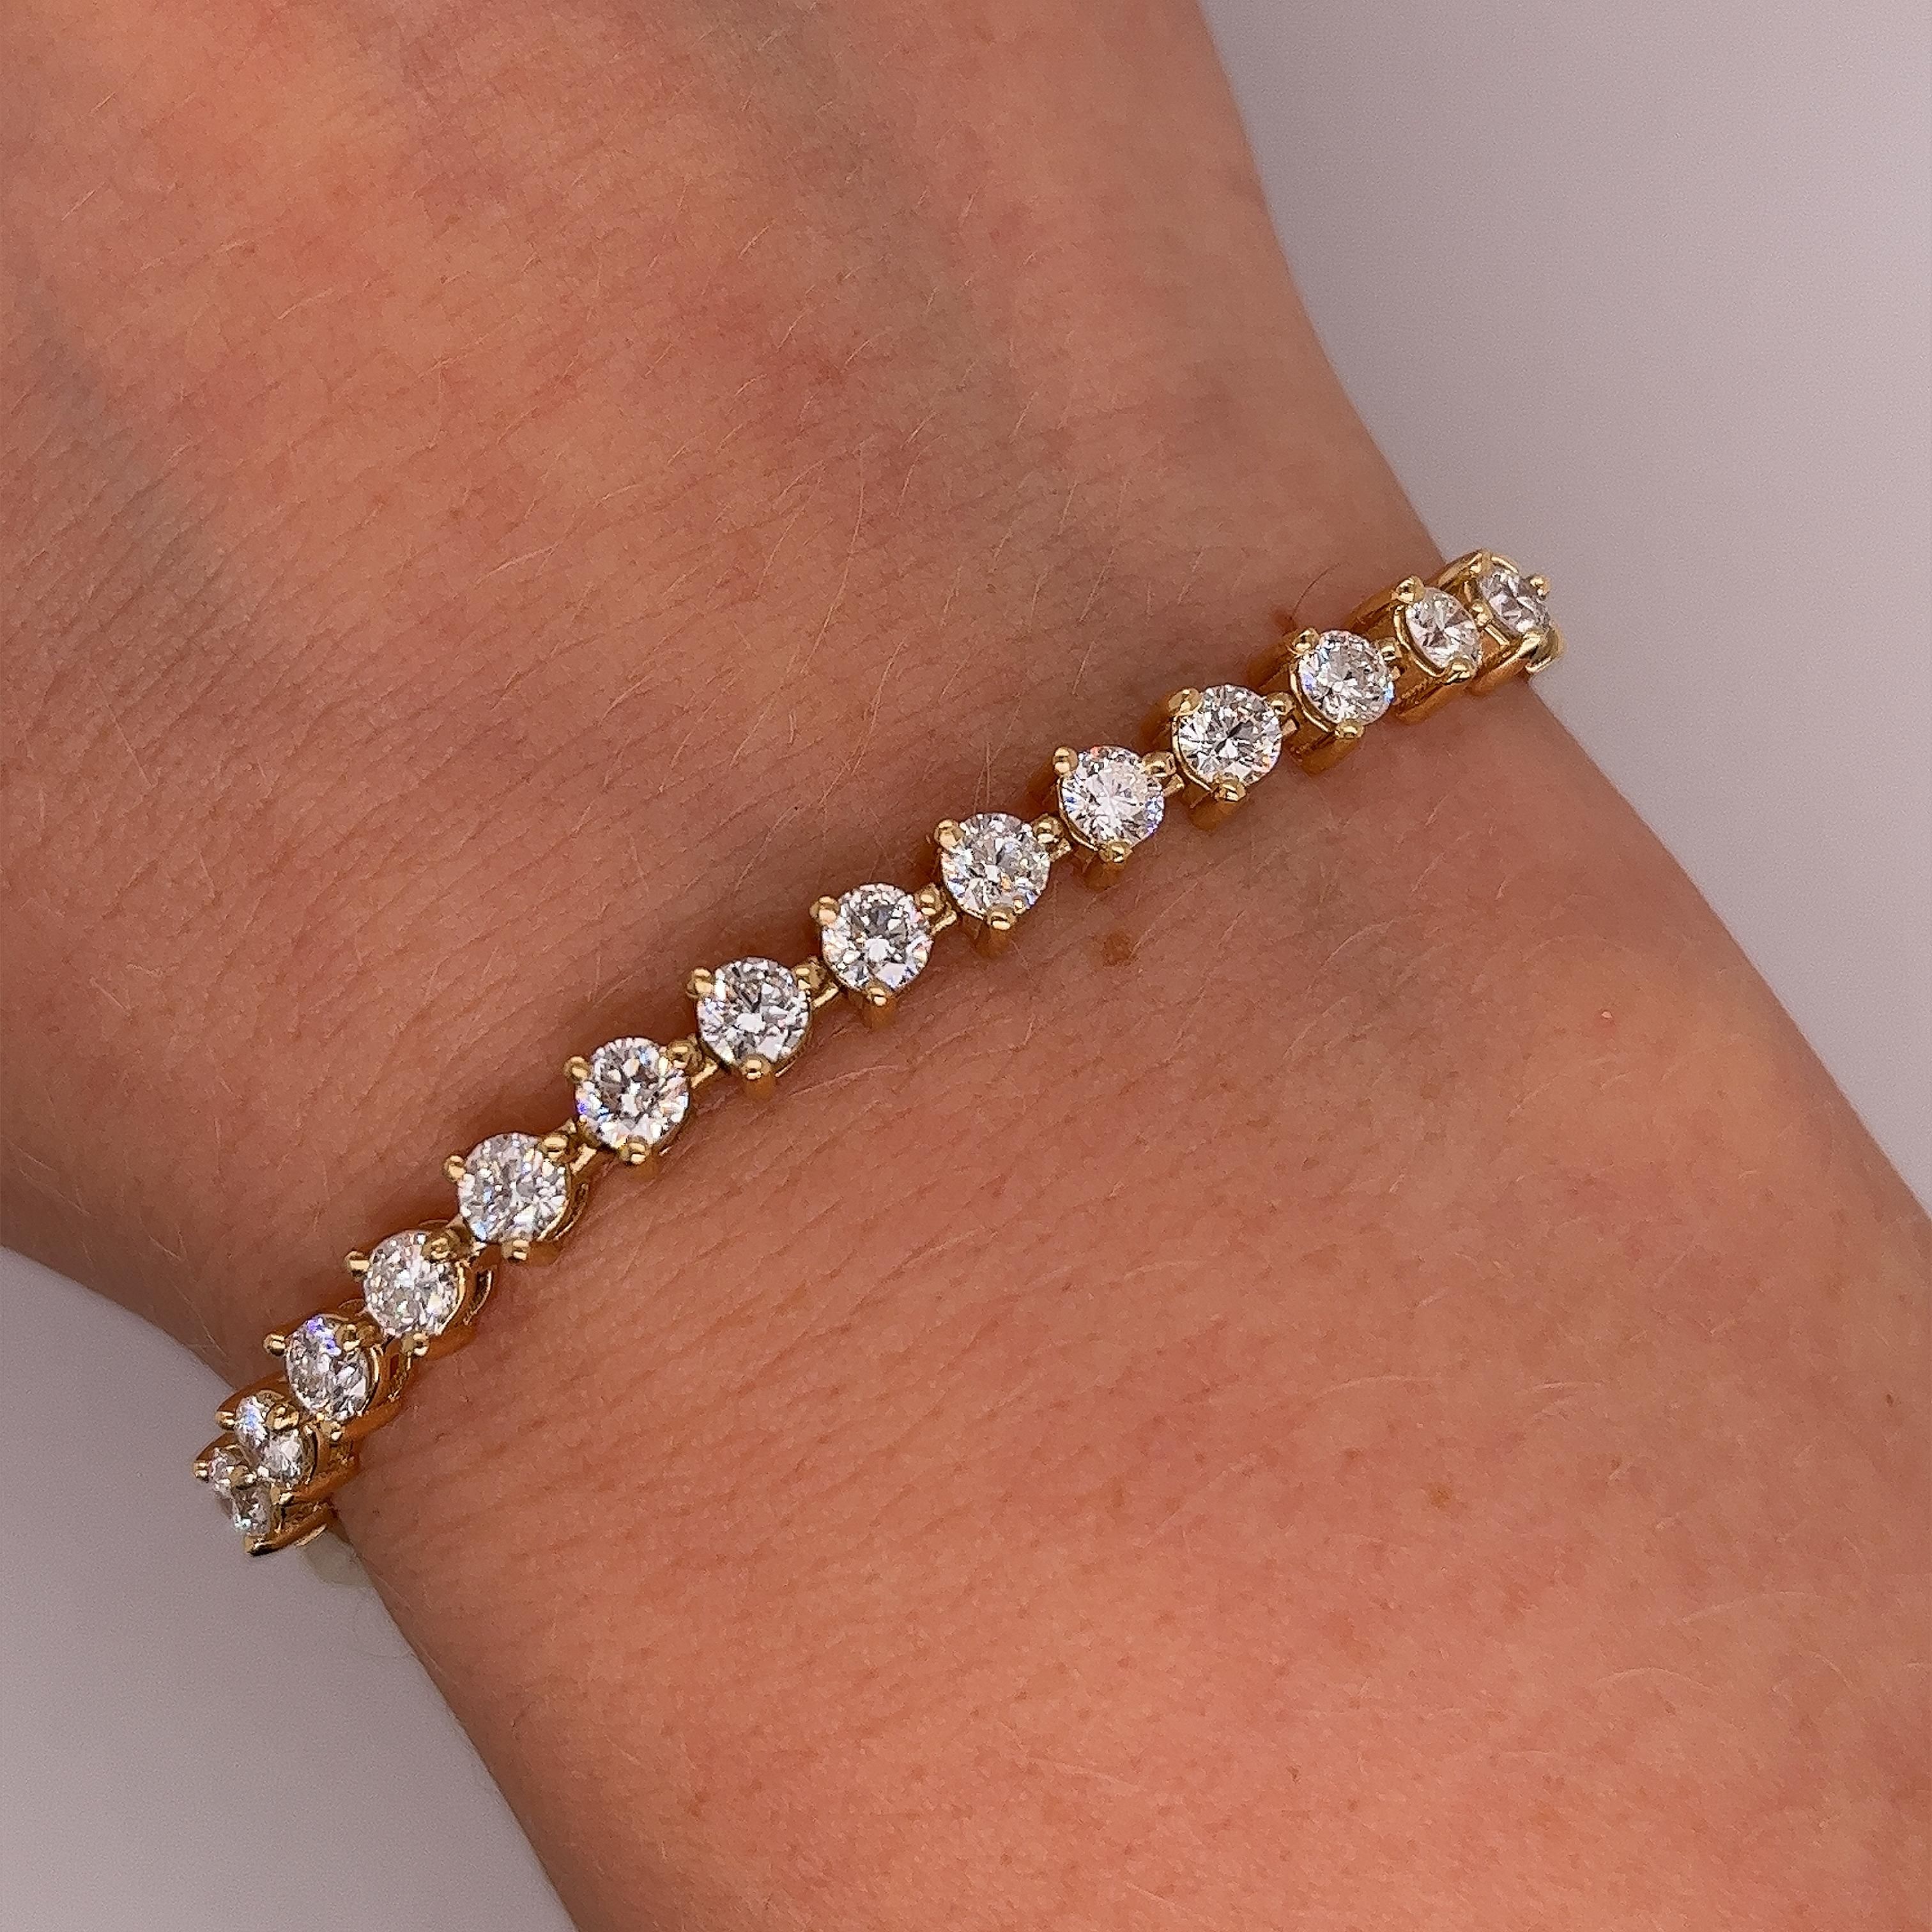 18ct Yellow Gold Natural Diamond Bracelet, Set With 2.25ct Round Diamonds For Sale 1